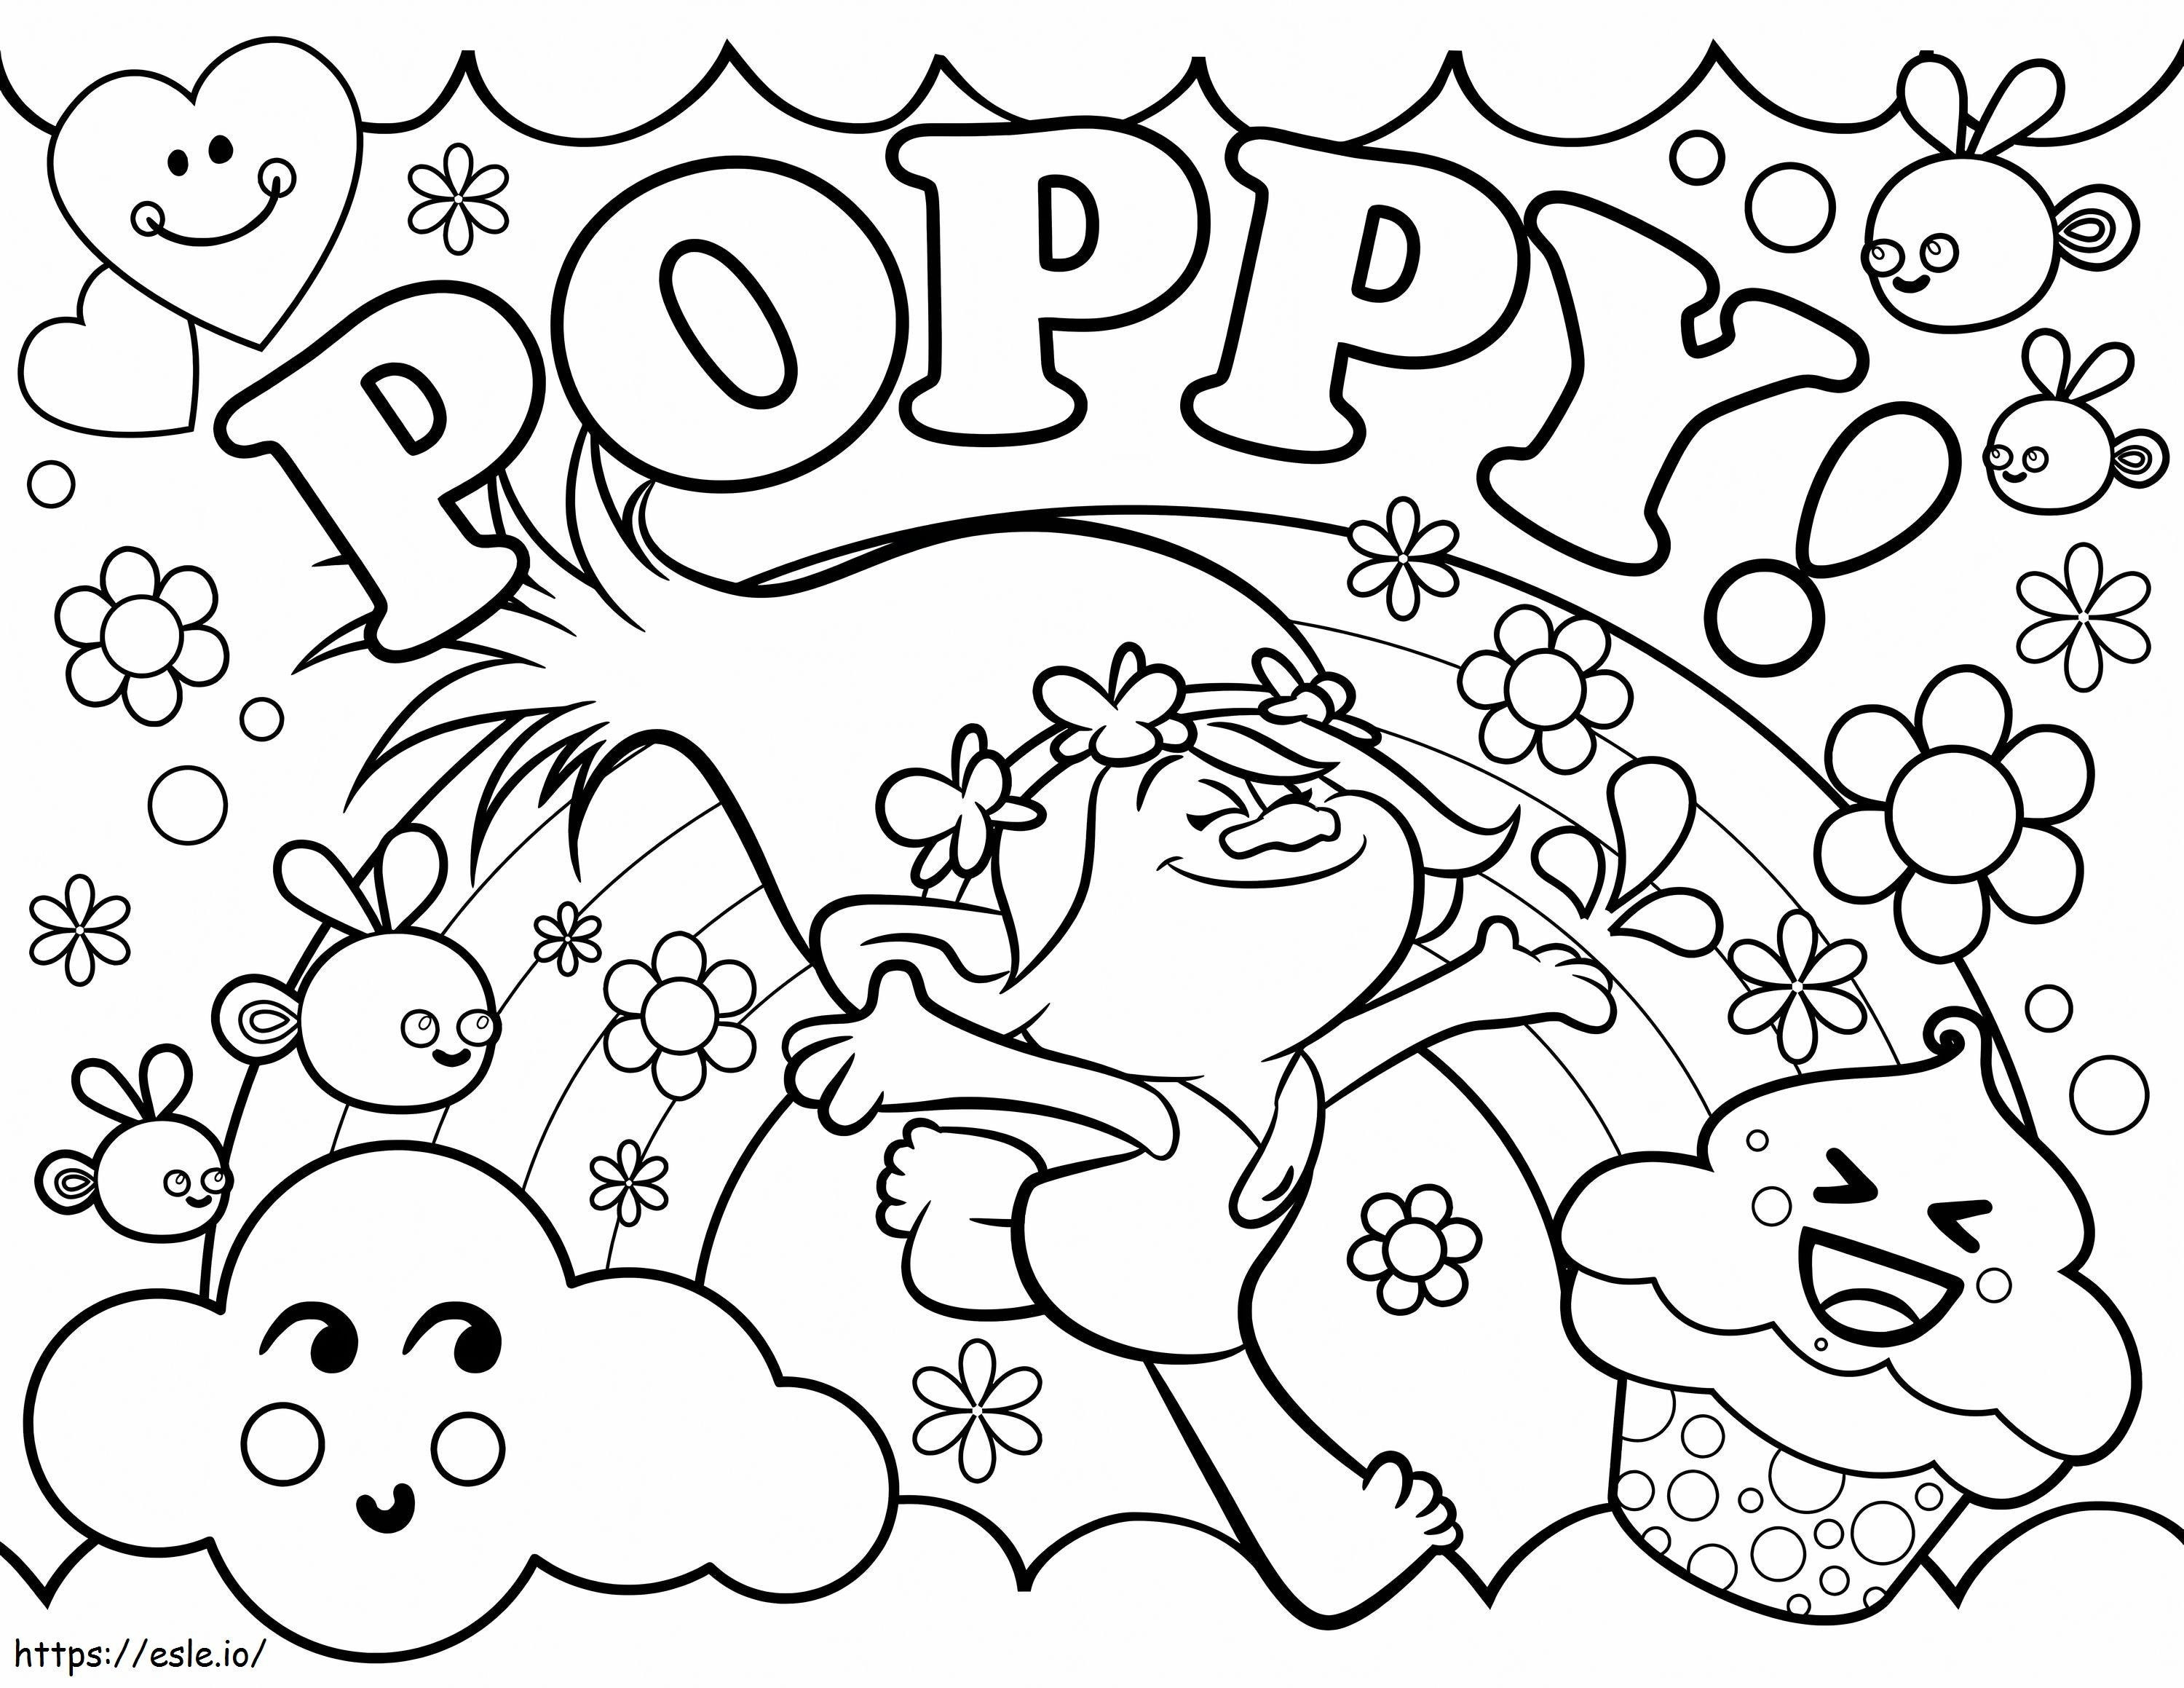 Poppy And Friends coloring page